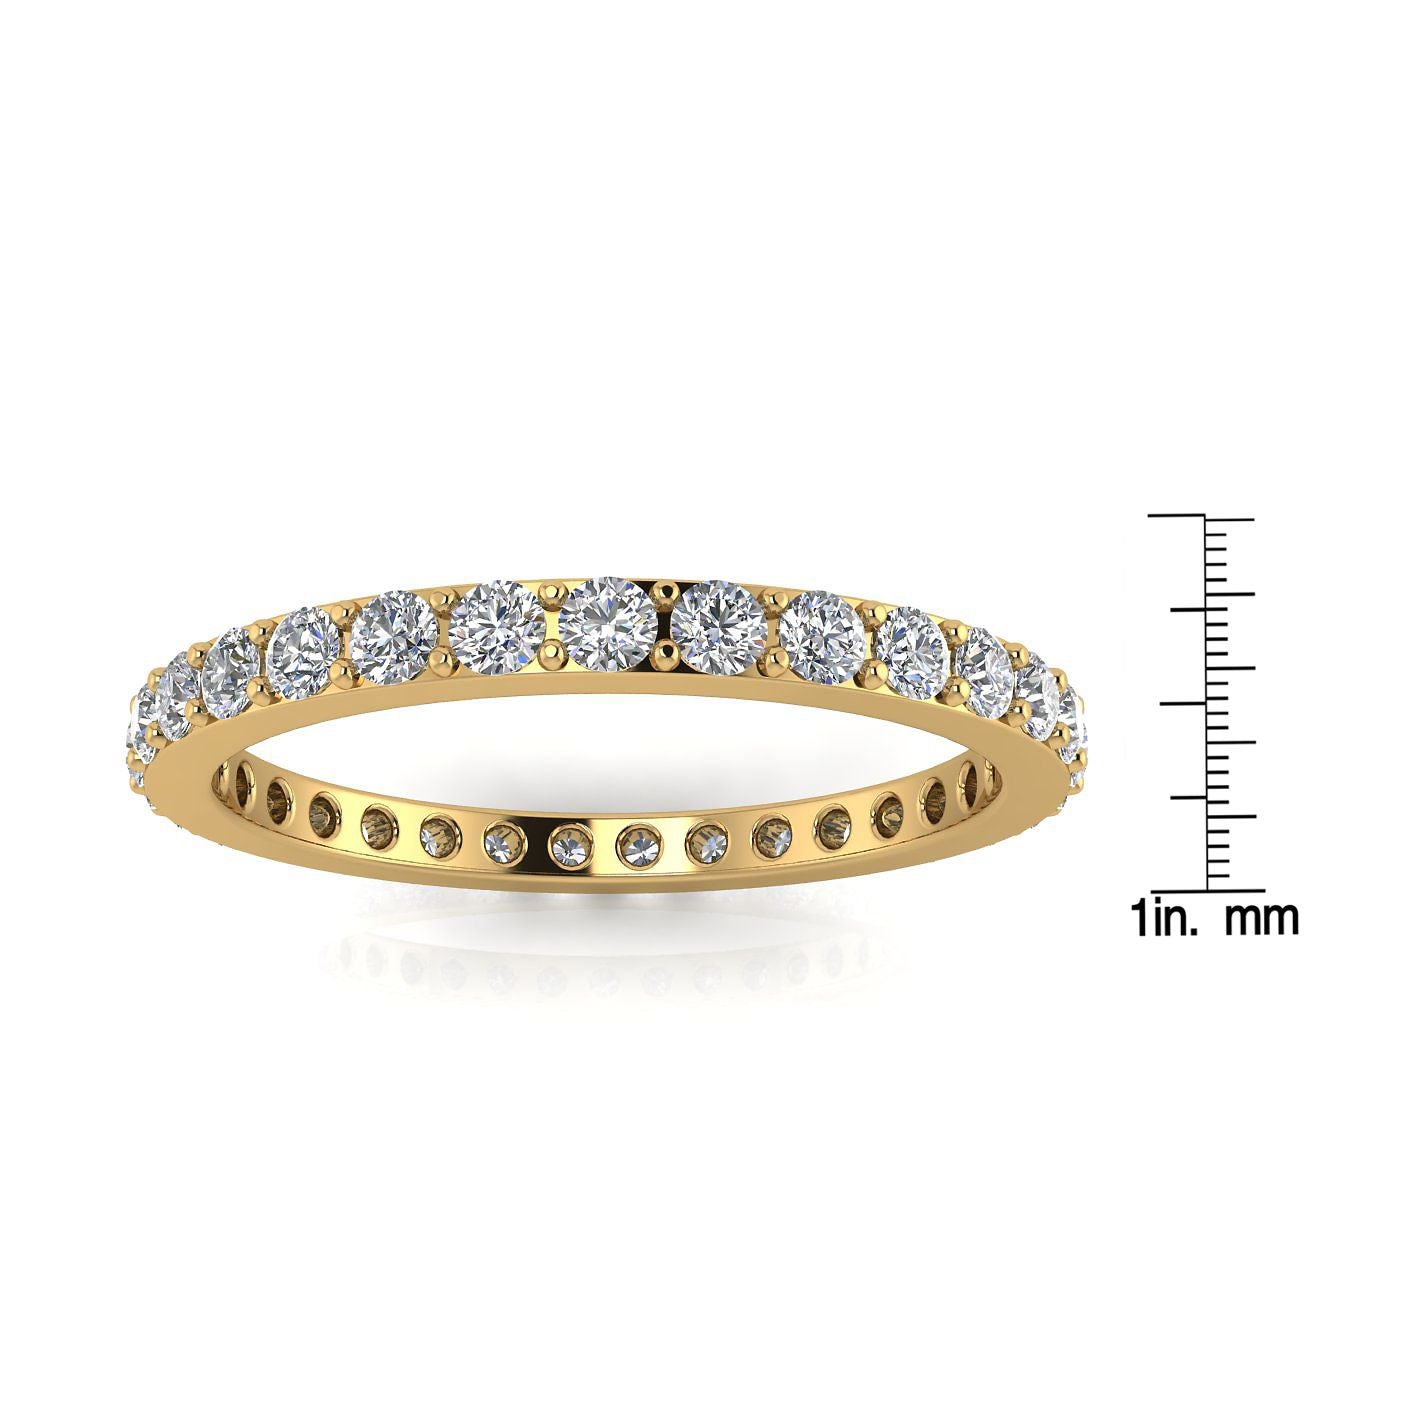 Round Brilliant Cut Diamond Pave Set Eternity Ring In 18k Yellow Gold  (0.7ct. Tw.) Ring Size 7